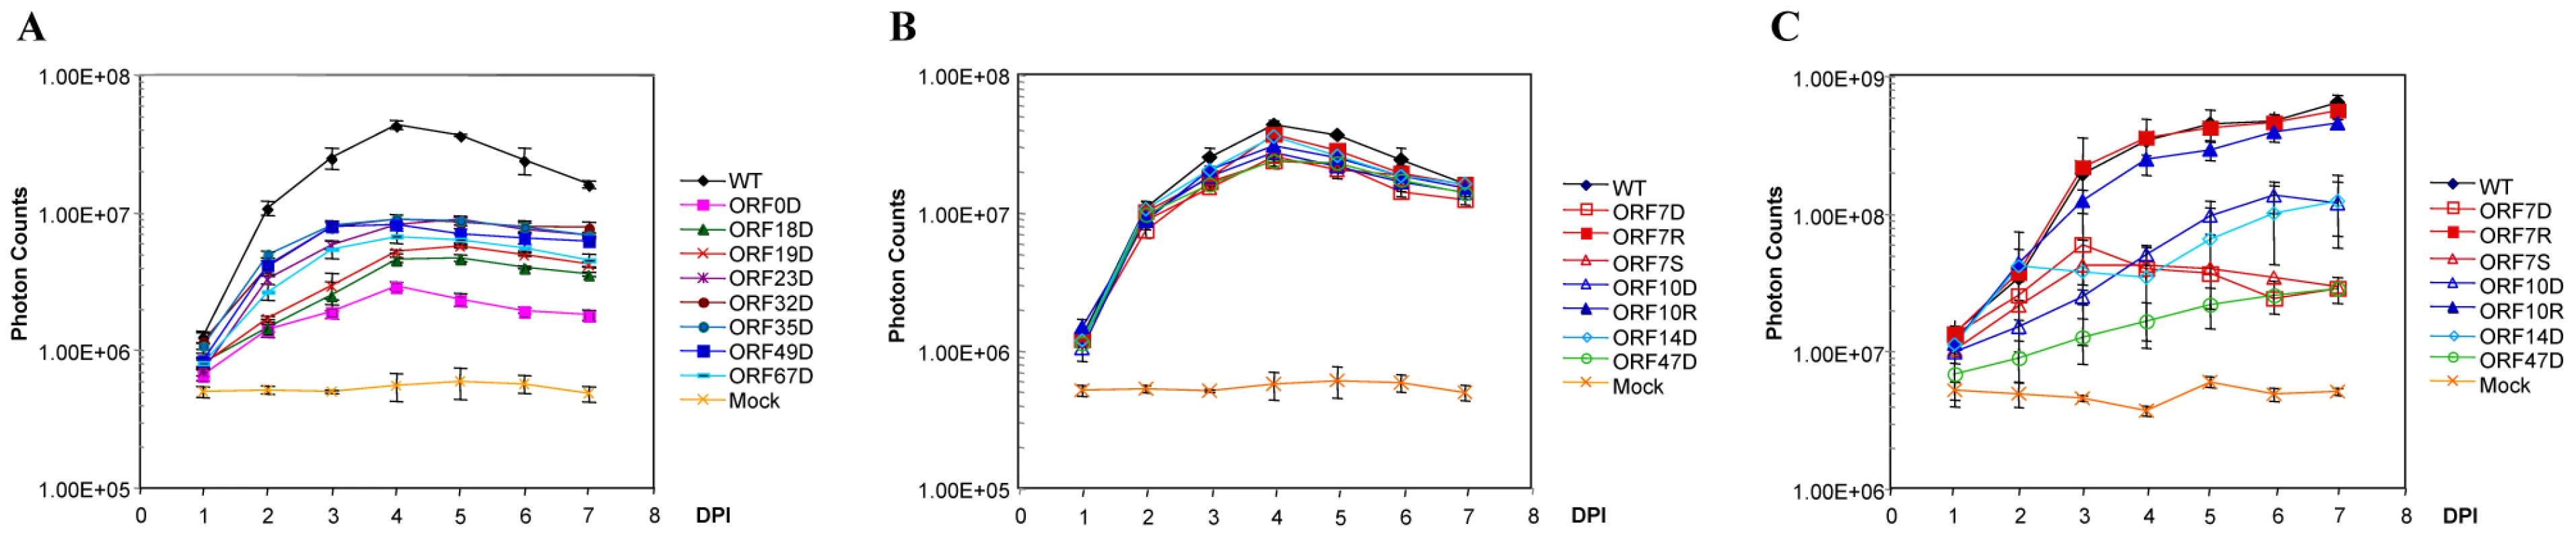 Growth curve analysis of some VZV deletion mutants.